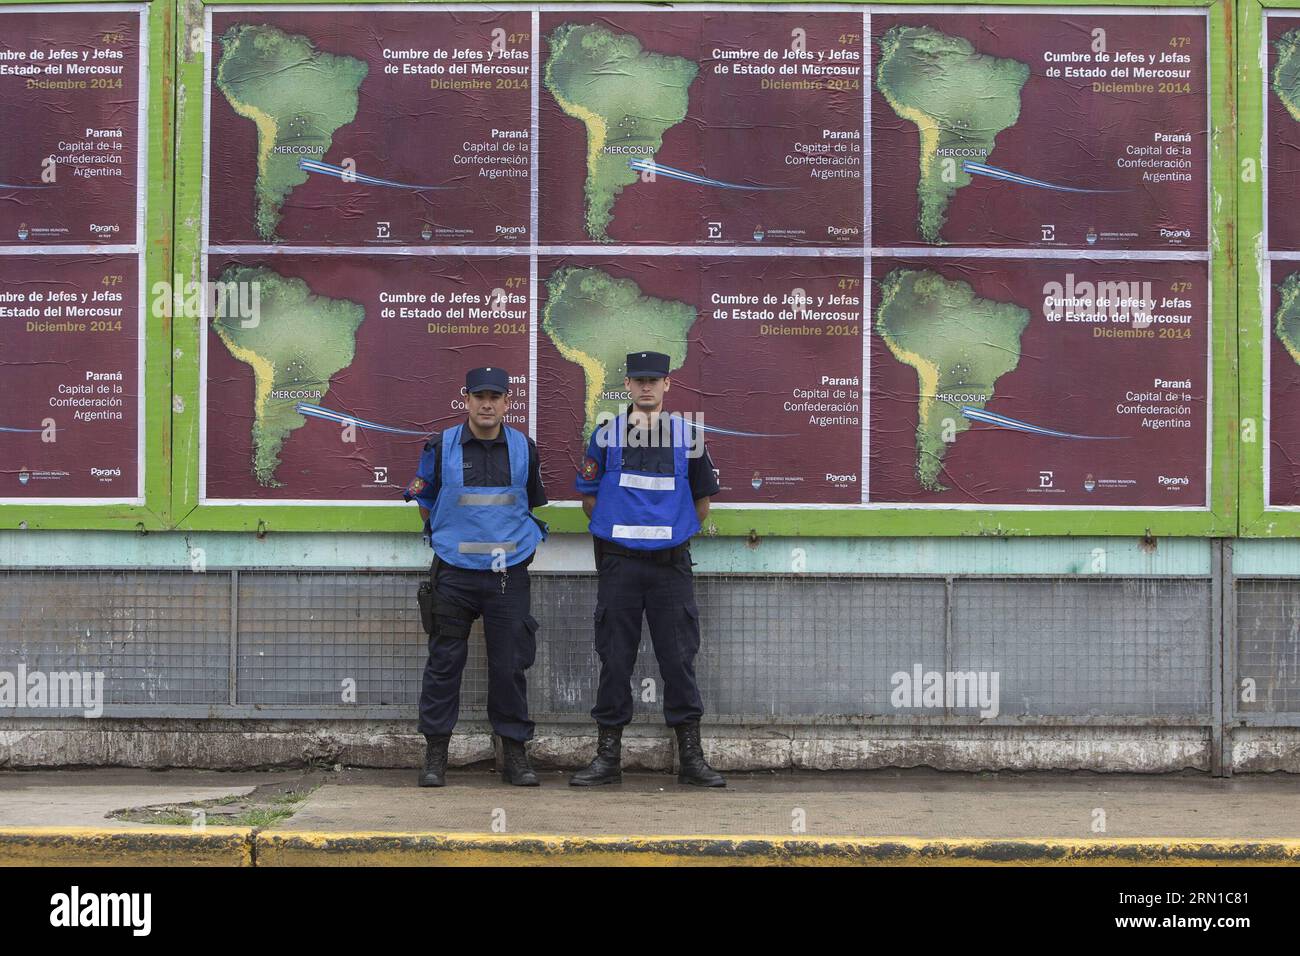 (141216) -- PARANA, Dec. 16, 2014 -- Entre Rios Province Police elements watch over the headquarters of 47th Southern Common Market (MERCOSUR) trade bloc presidential summit in Alvear Square of Parana city, north of Buenos Aires, Argentina, on Dec. 16, 2014. The 47th Southern Common Market (MERCOSUR) trade bloc presidential summit will open on Wednesday in Parana. Martin Zabala) ARGENTINA-PARANA-MERCOSUR-SUMMIT e MARTINxZABALA PUBLICATIONxNOTxINxCHN   Parana DEC 16 2014 Entre Rios Province Police Element Watch Over The Headquarters of 47th Southern Common Market Mercosur Trade Bloc Presidentia Stock Photo